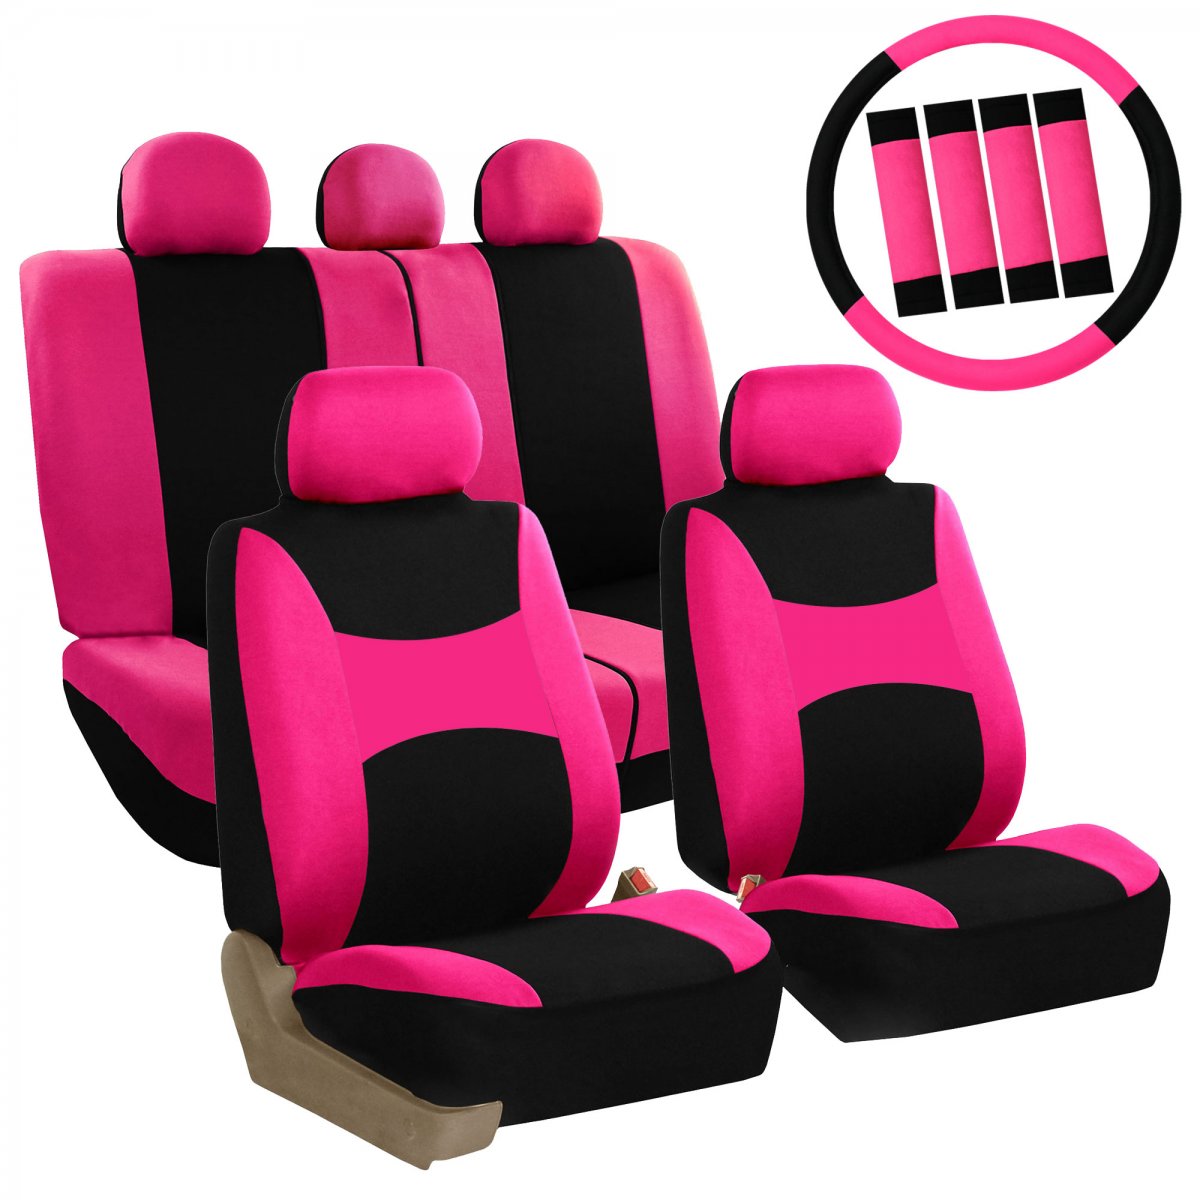 Car Seats with Wheels